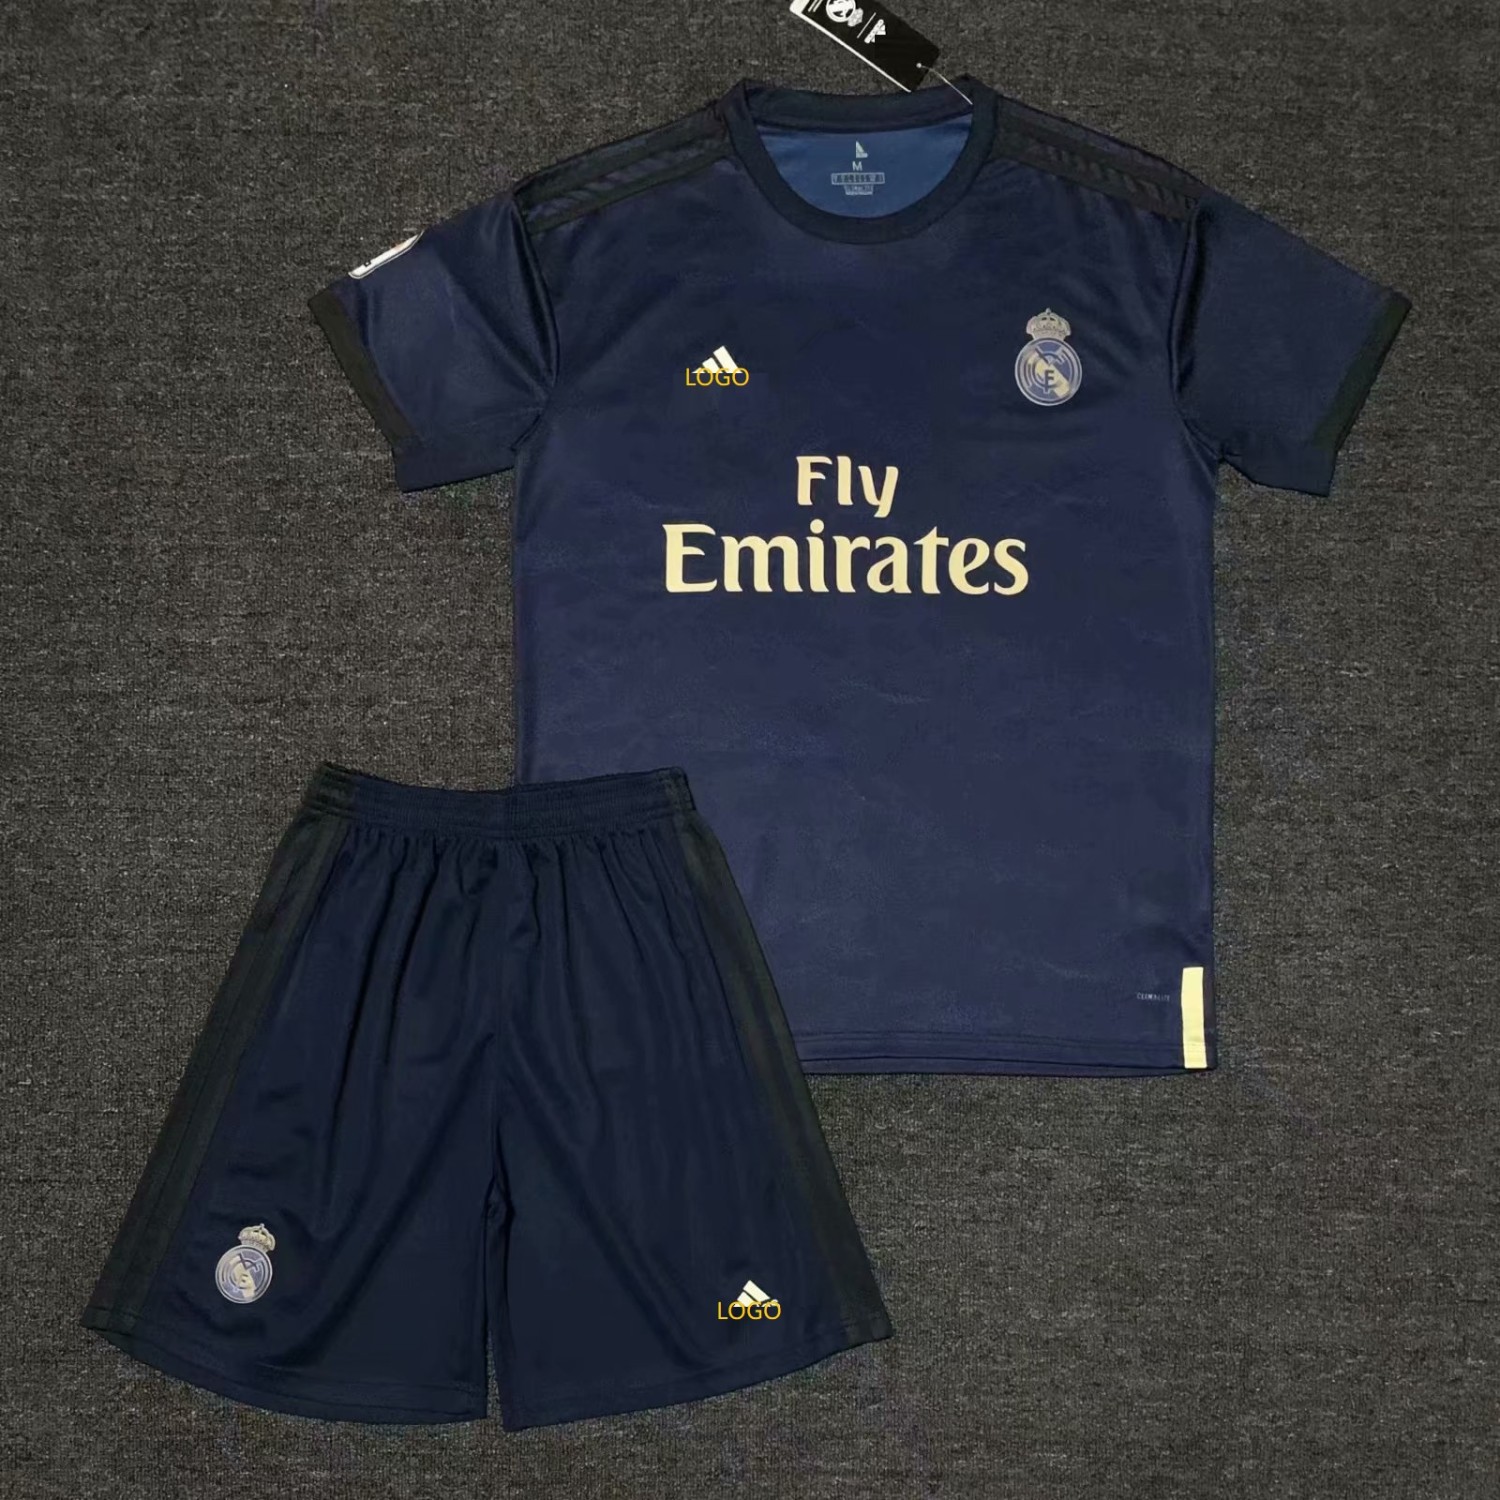 19/20 Adult AAA Quality real madrid soccer uniforms customize name number